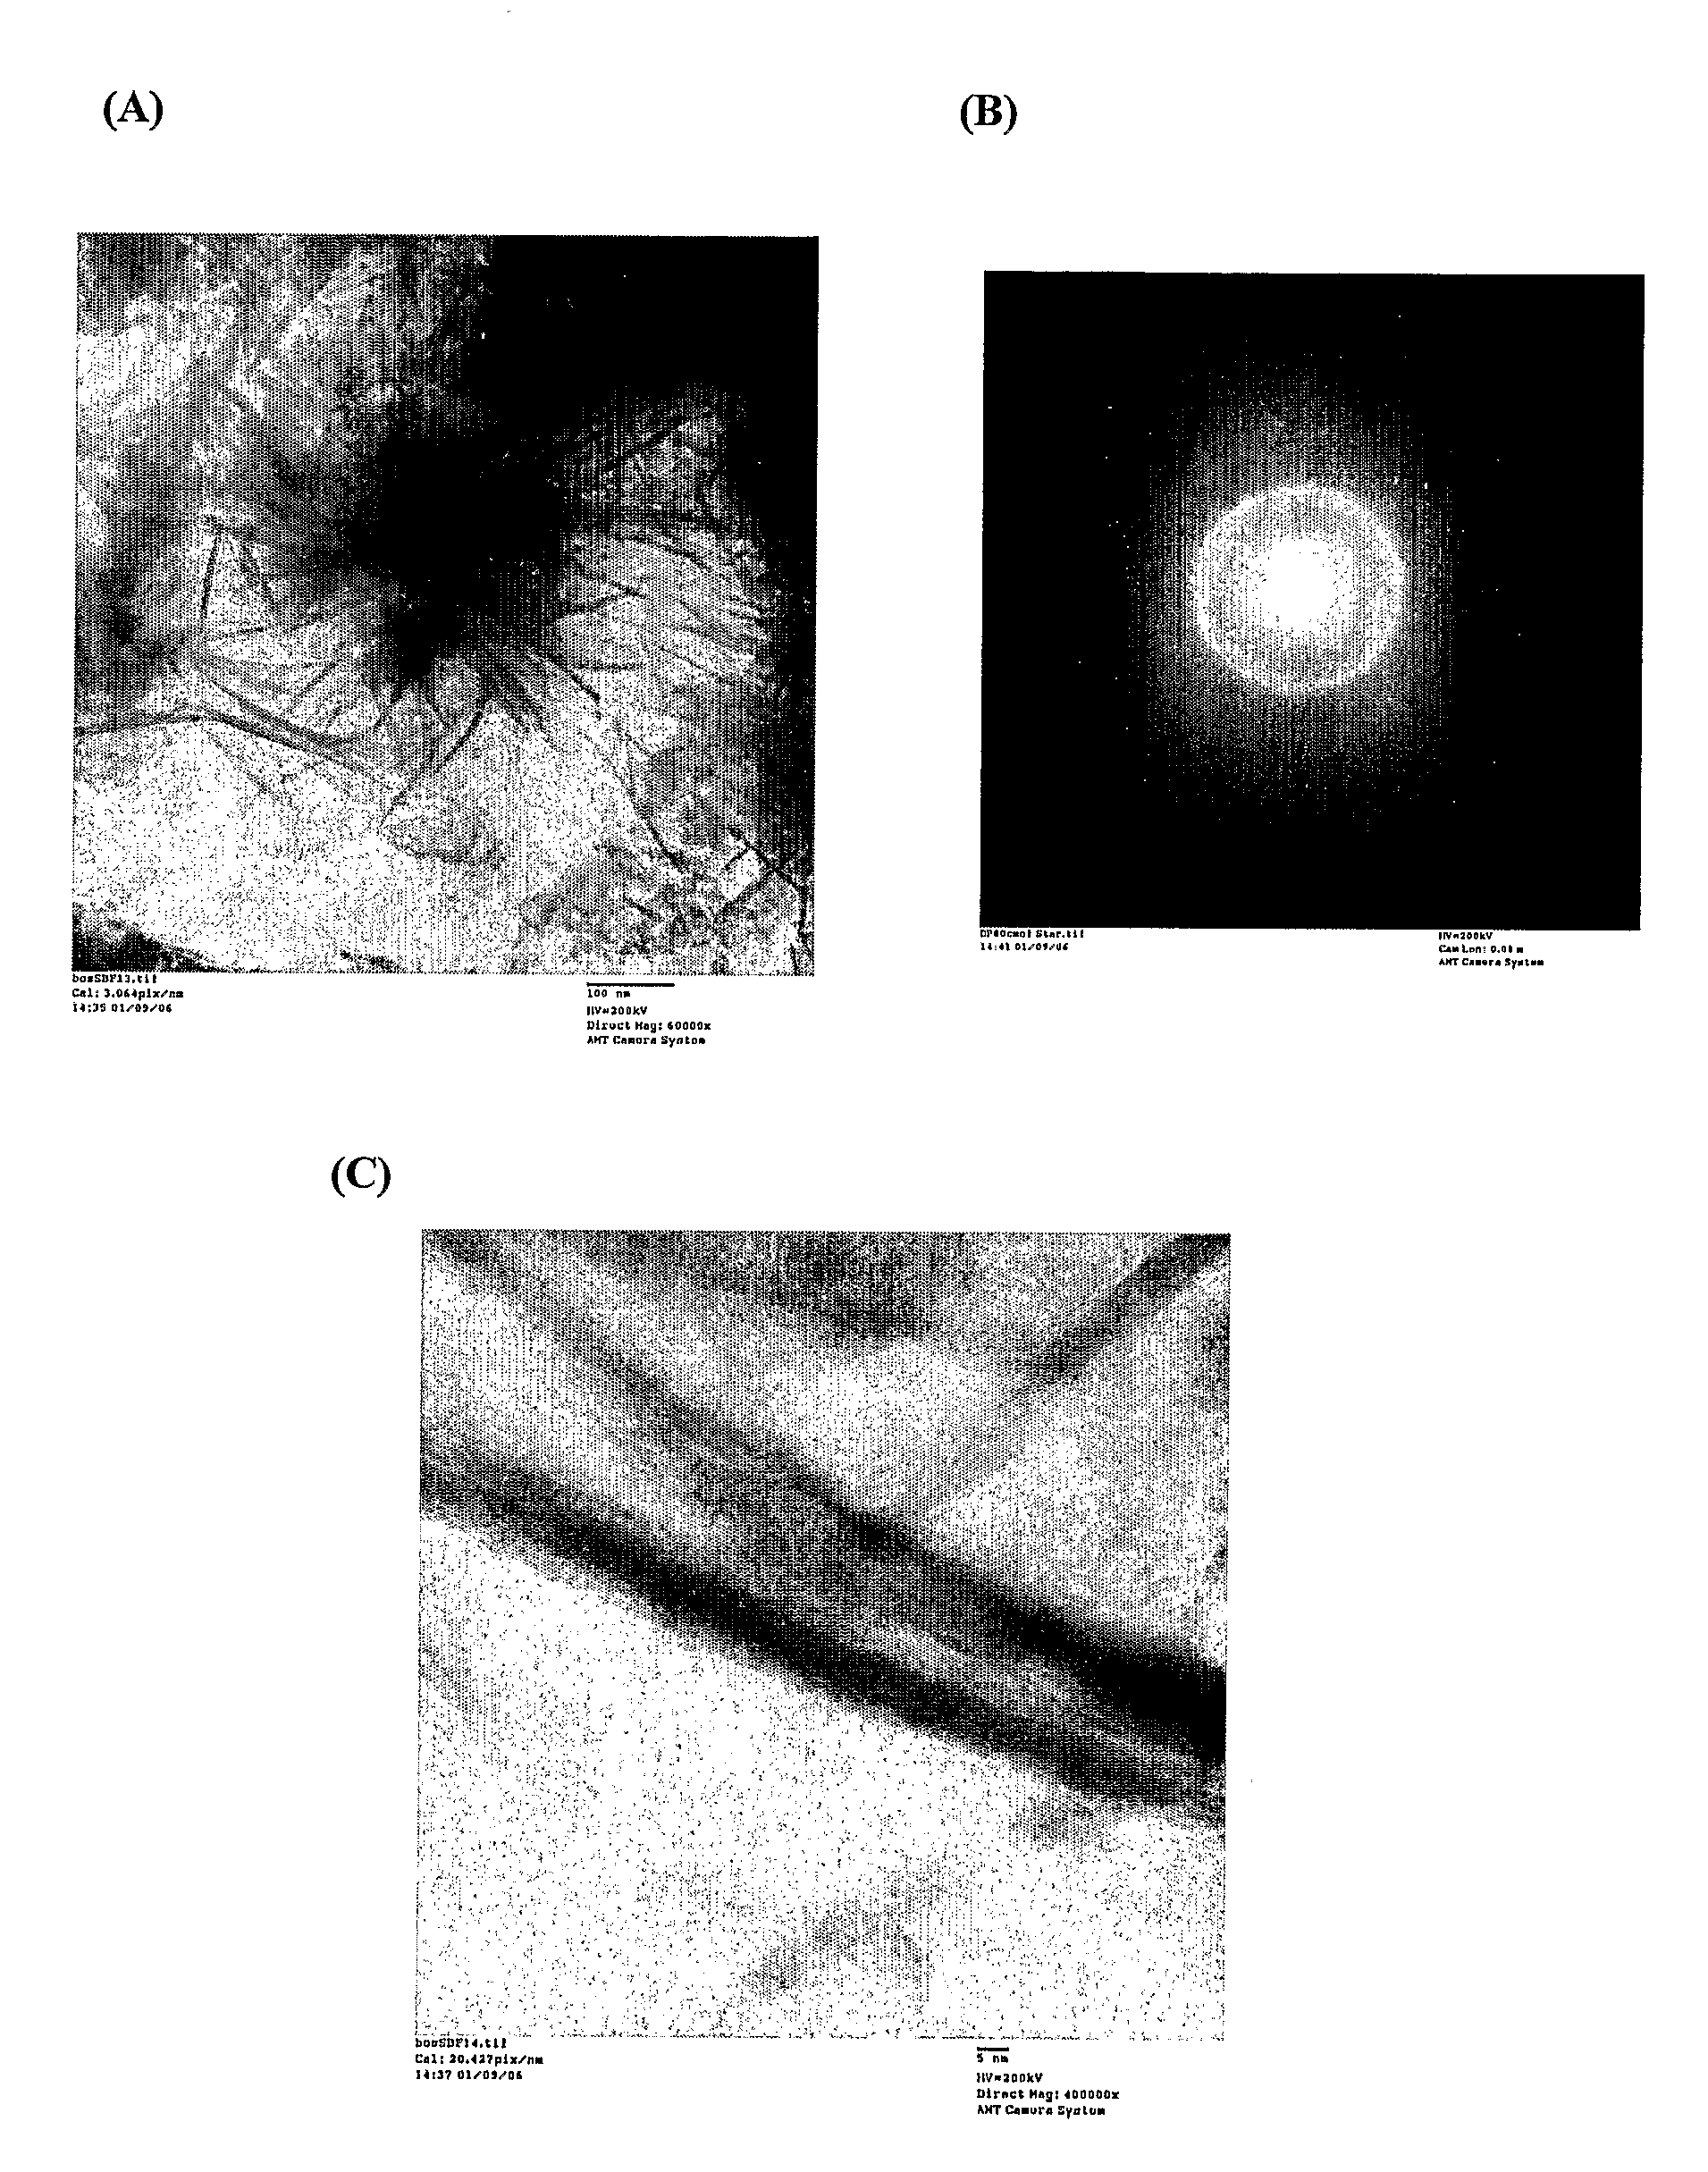 Fibrous Protein Fusions and Use Thereof in the Formation of Advanced Organic/Inorganic Composite Materials